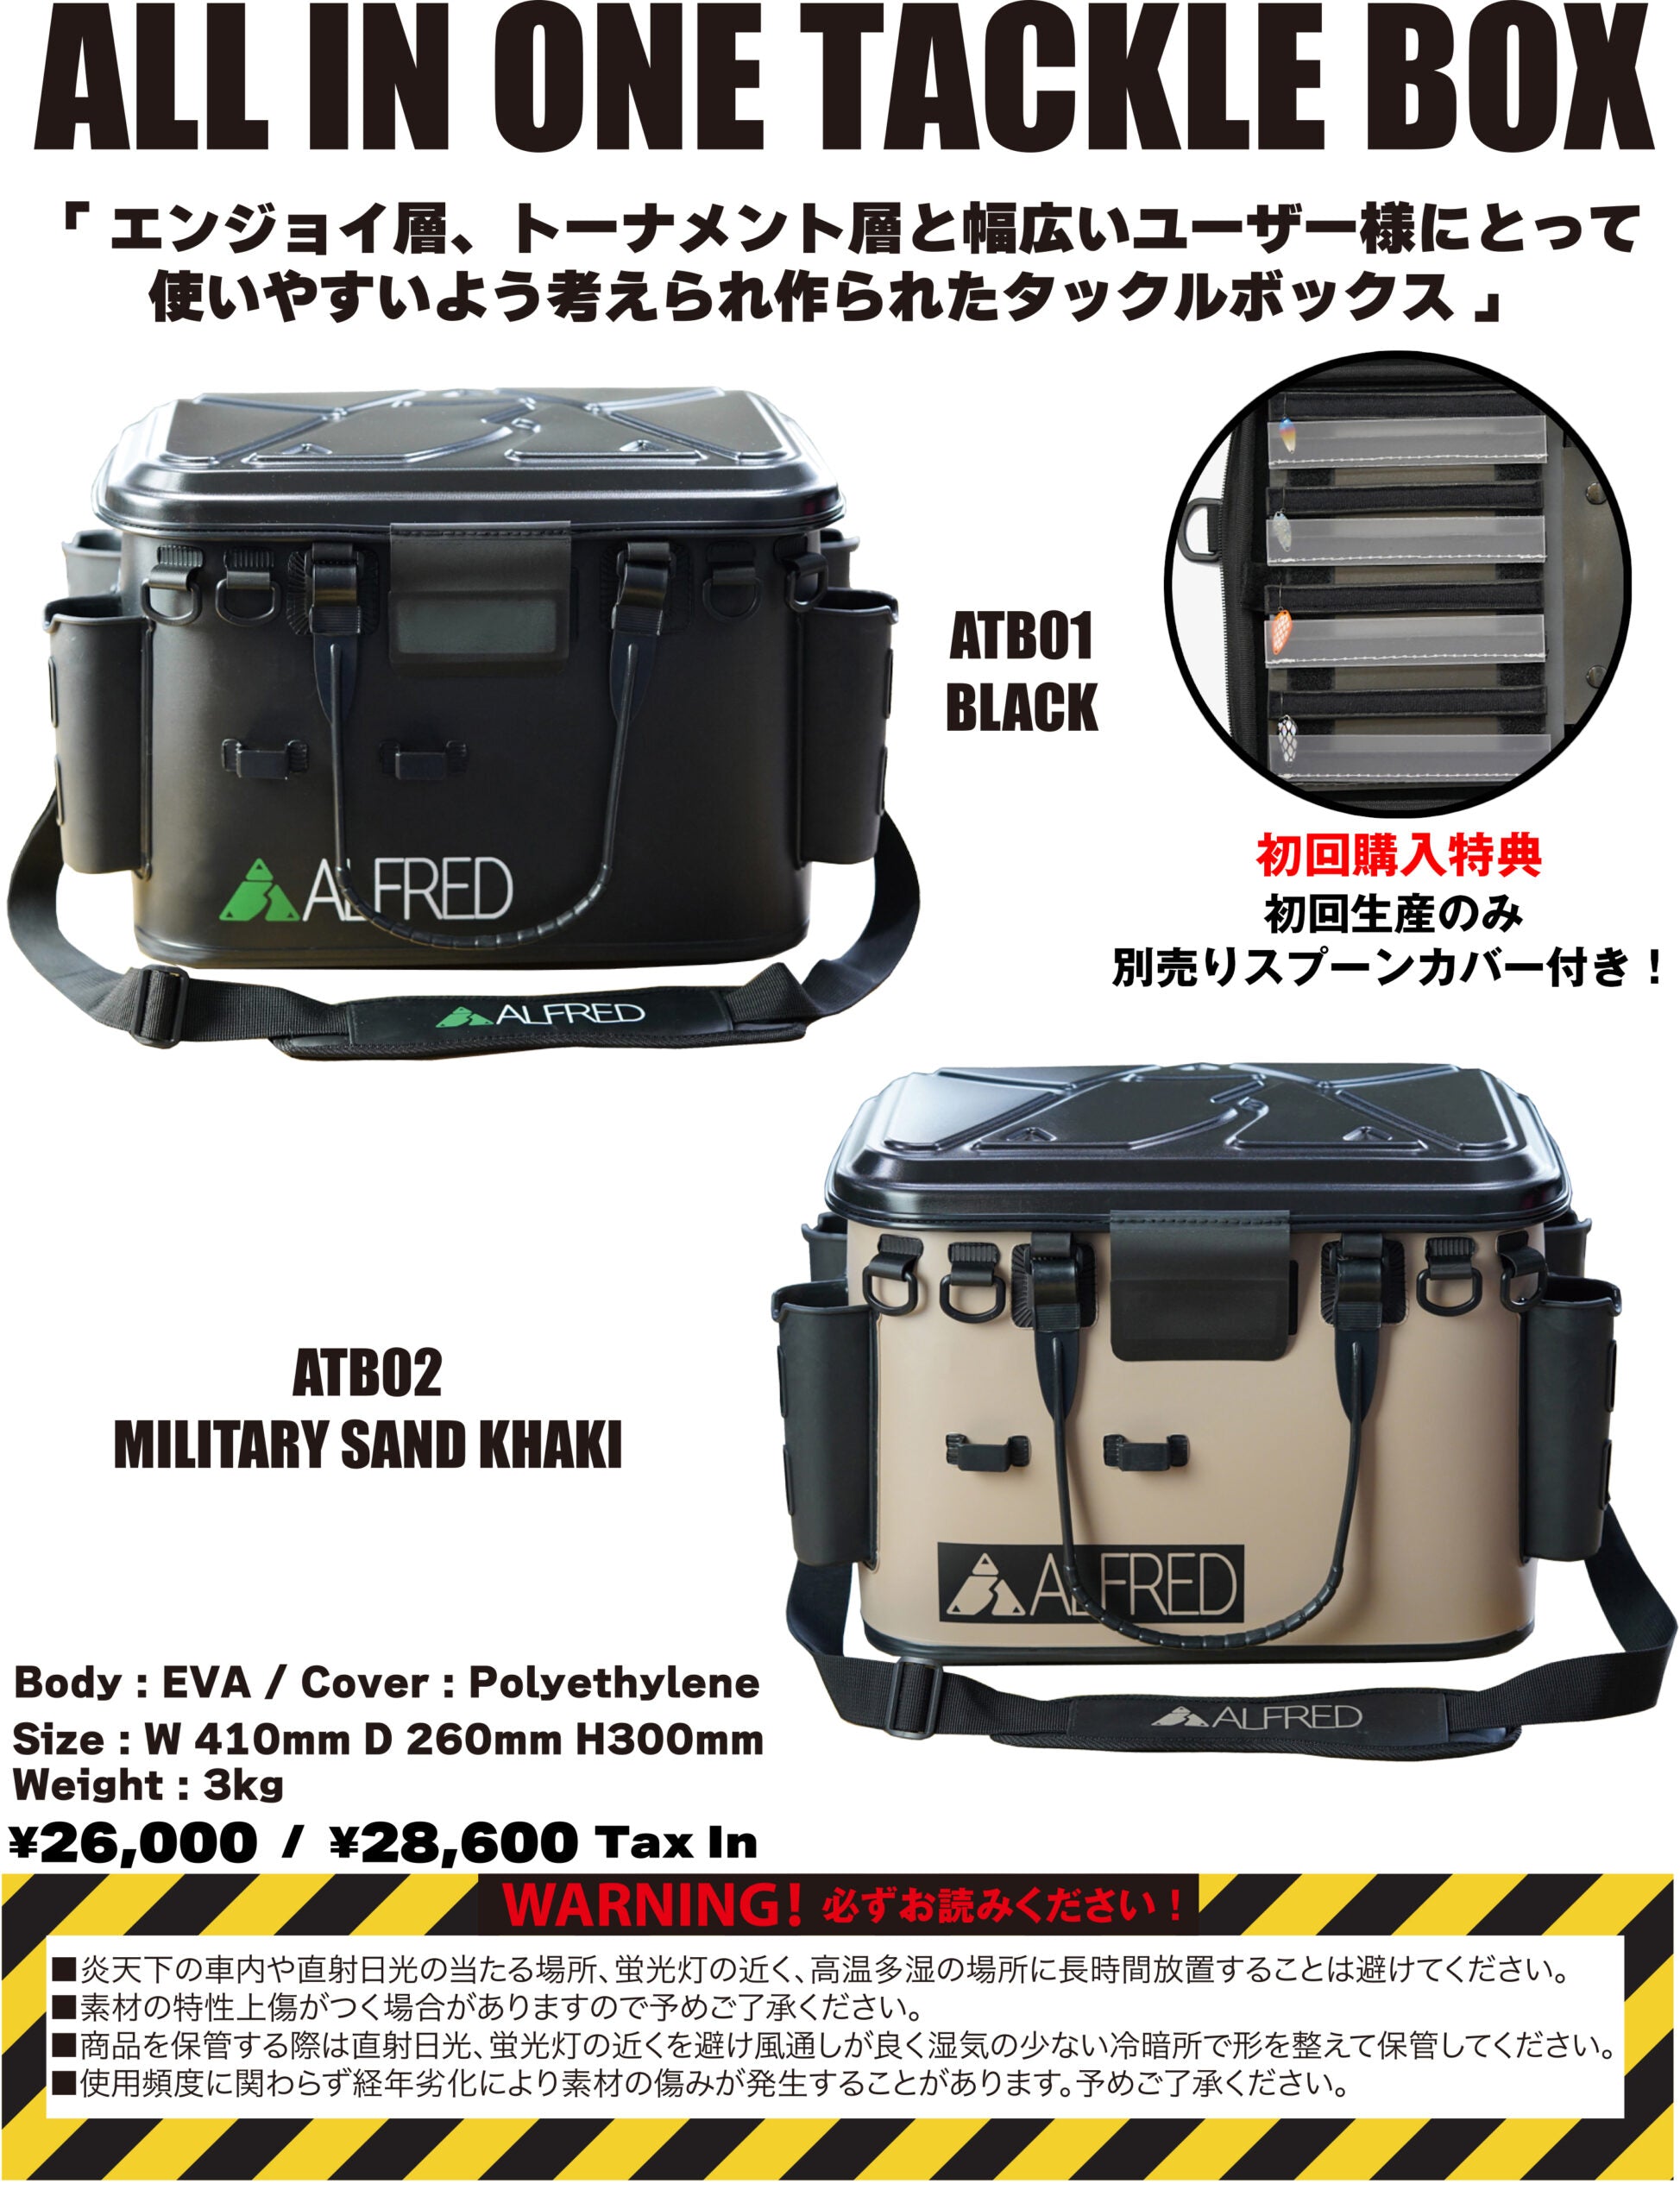 ALFRED ALL IN ONE TACKLE BOX – t-Route